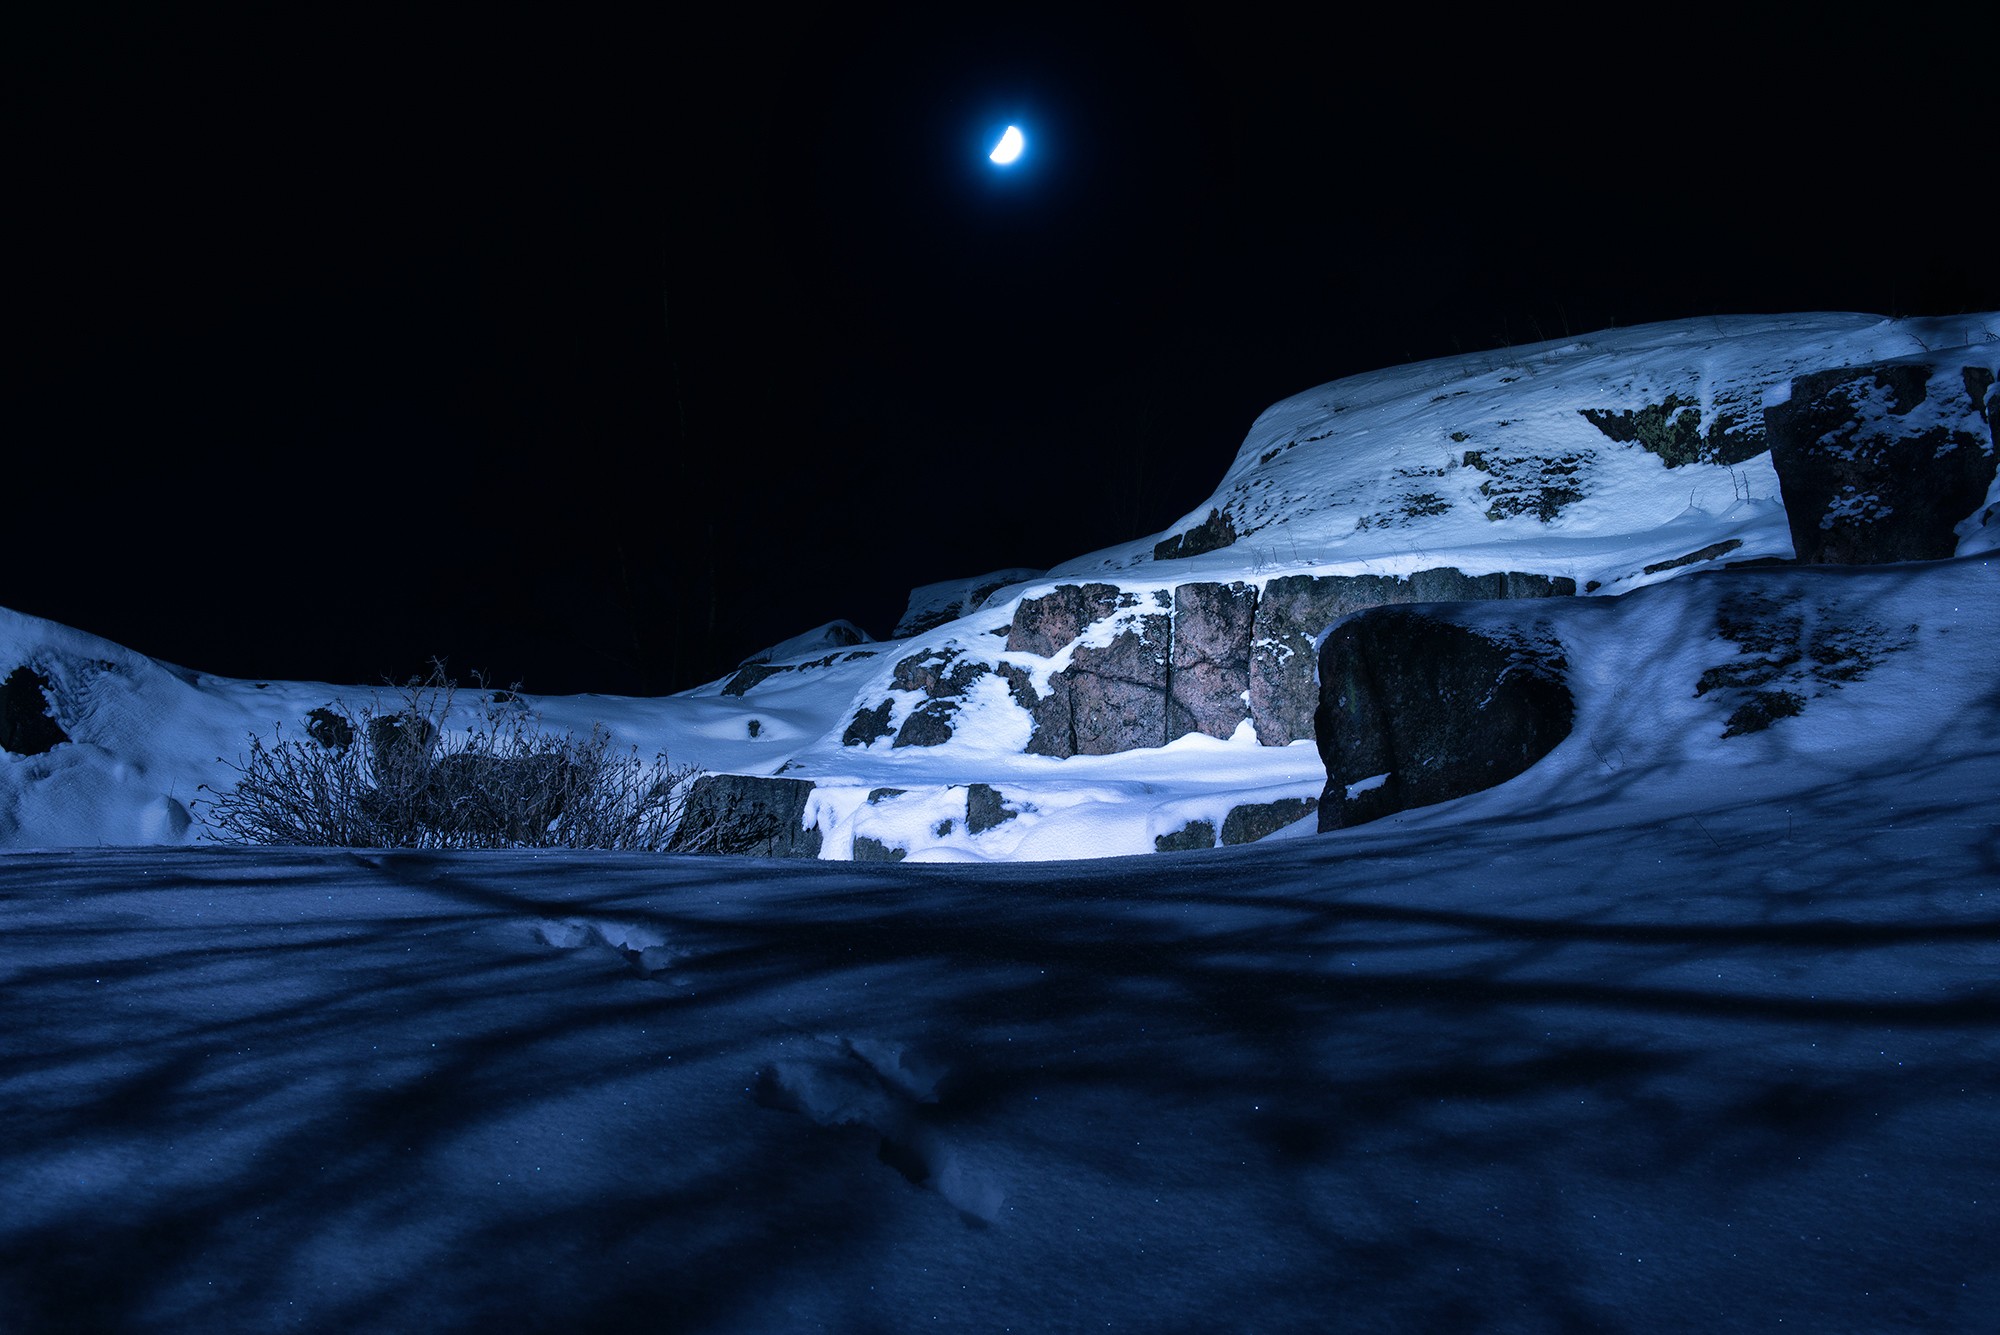 General 2000x1335 night winter ice landscape cold outdoors Moon sky nature